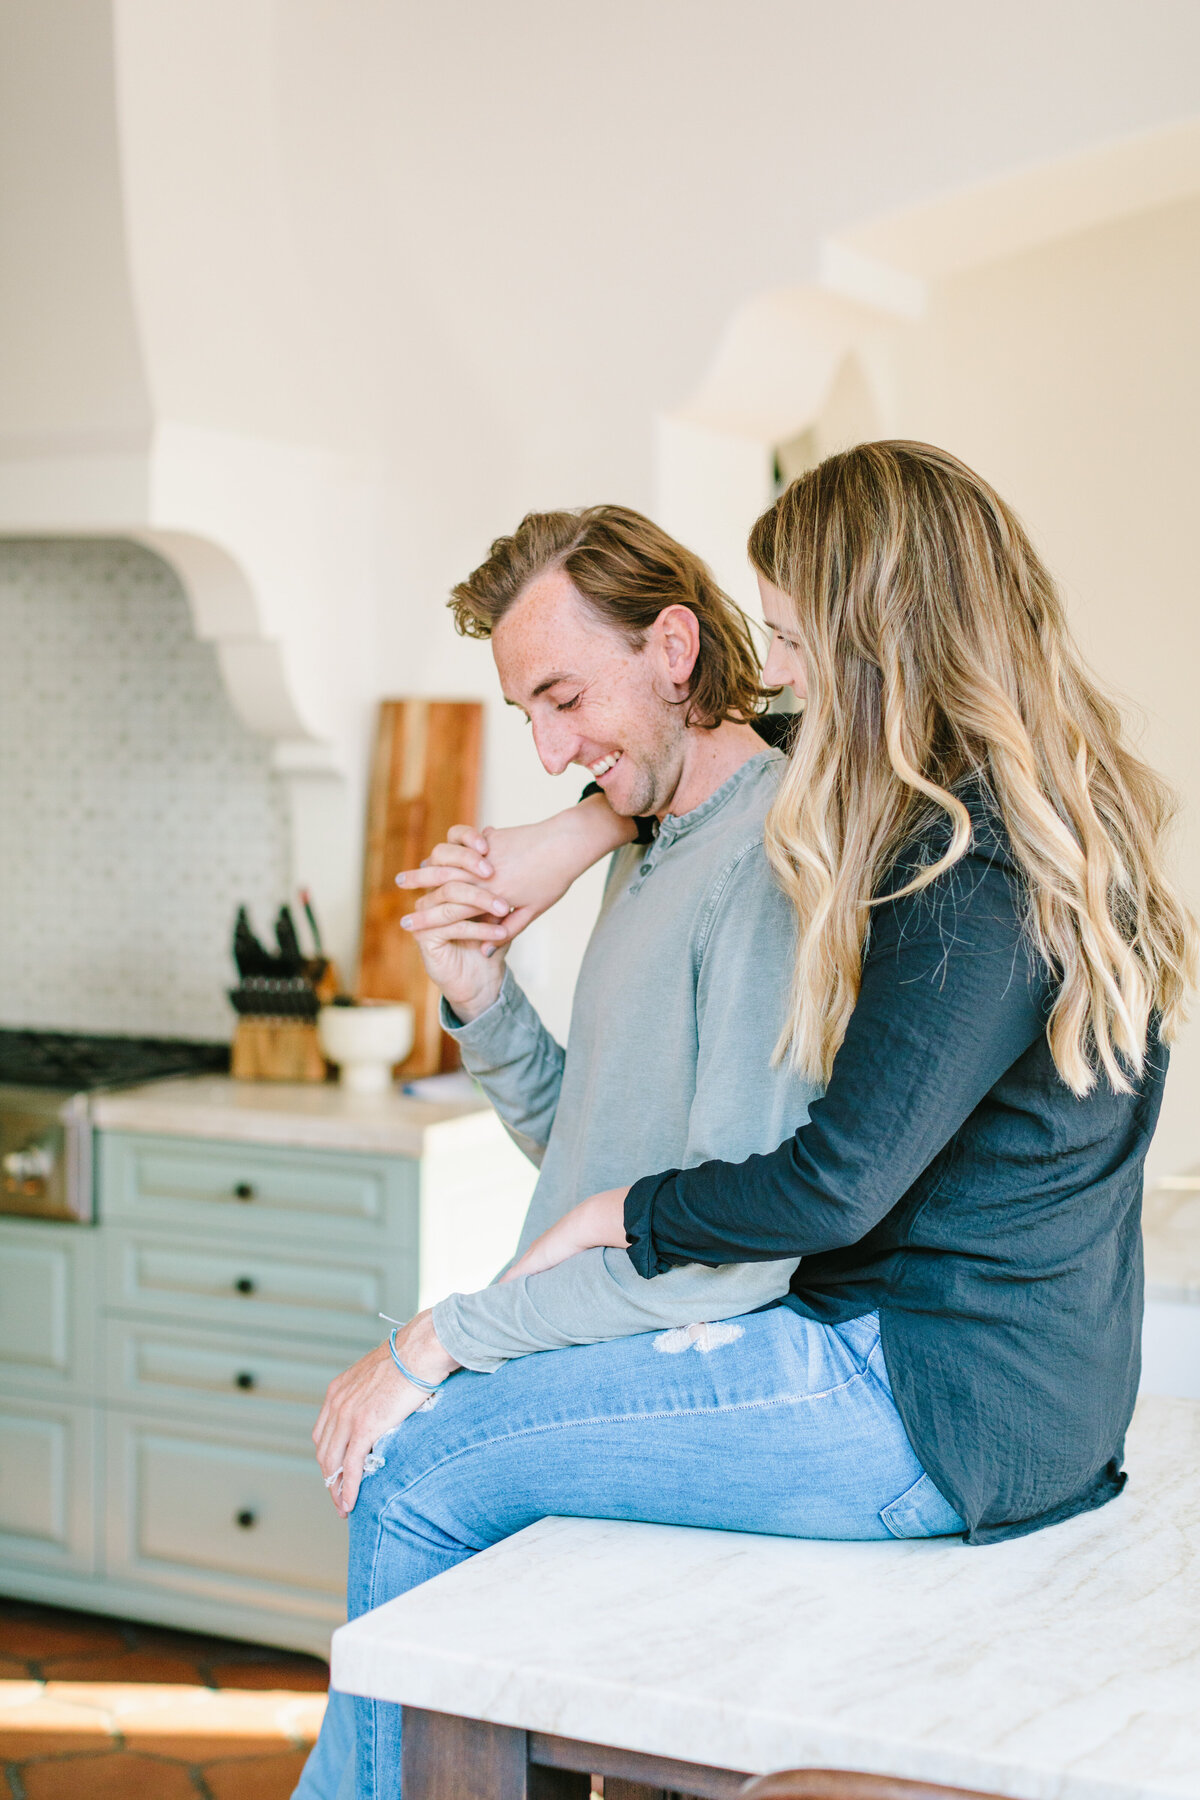 Best California and Texas Engagement Photographer-Jodee Debes Photography-274